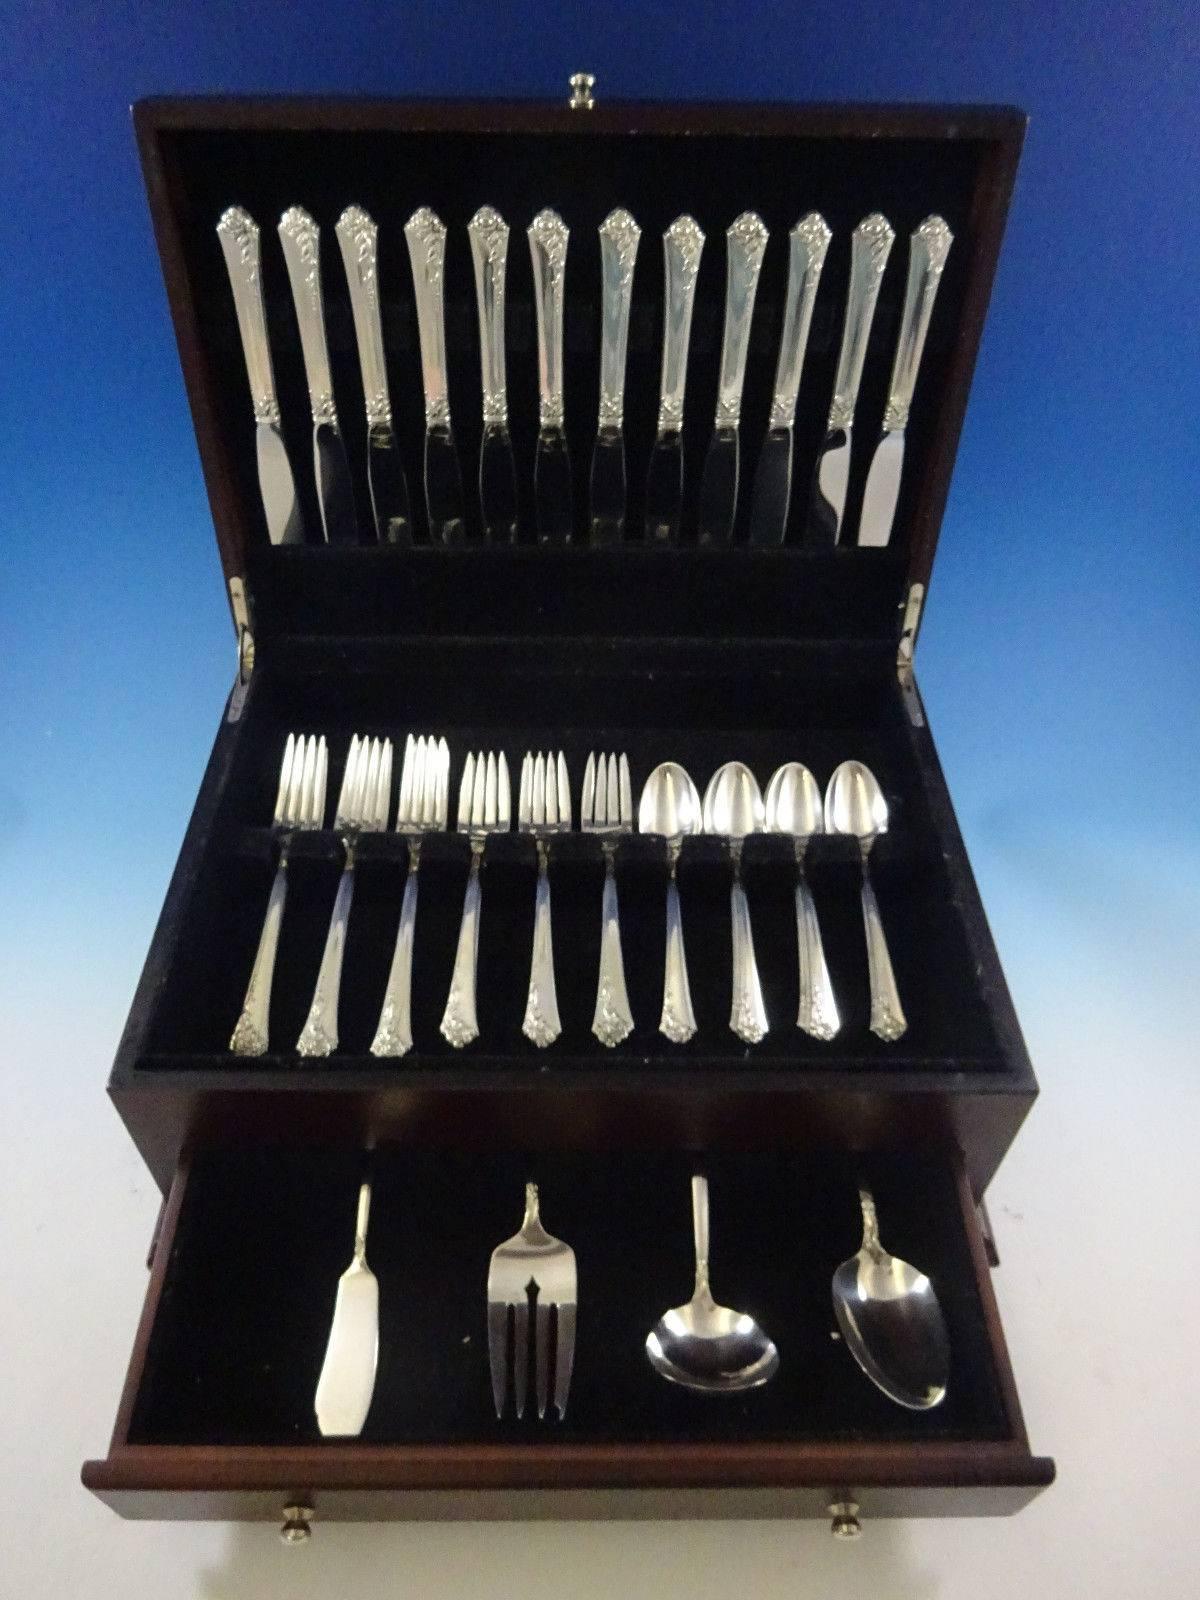 Damask Rose by Oneida sterling silver flatware set, 52 pieces. This set includes: 

12 knives, 8 3/4